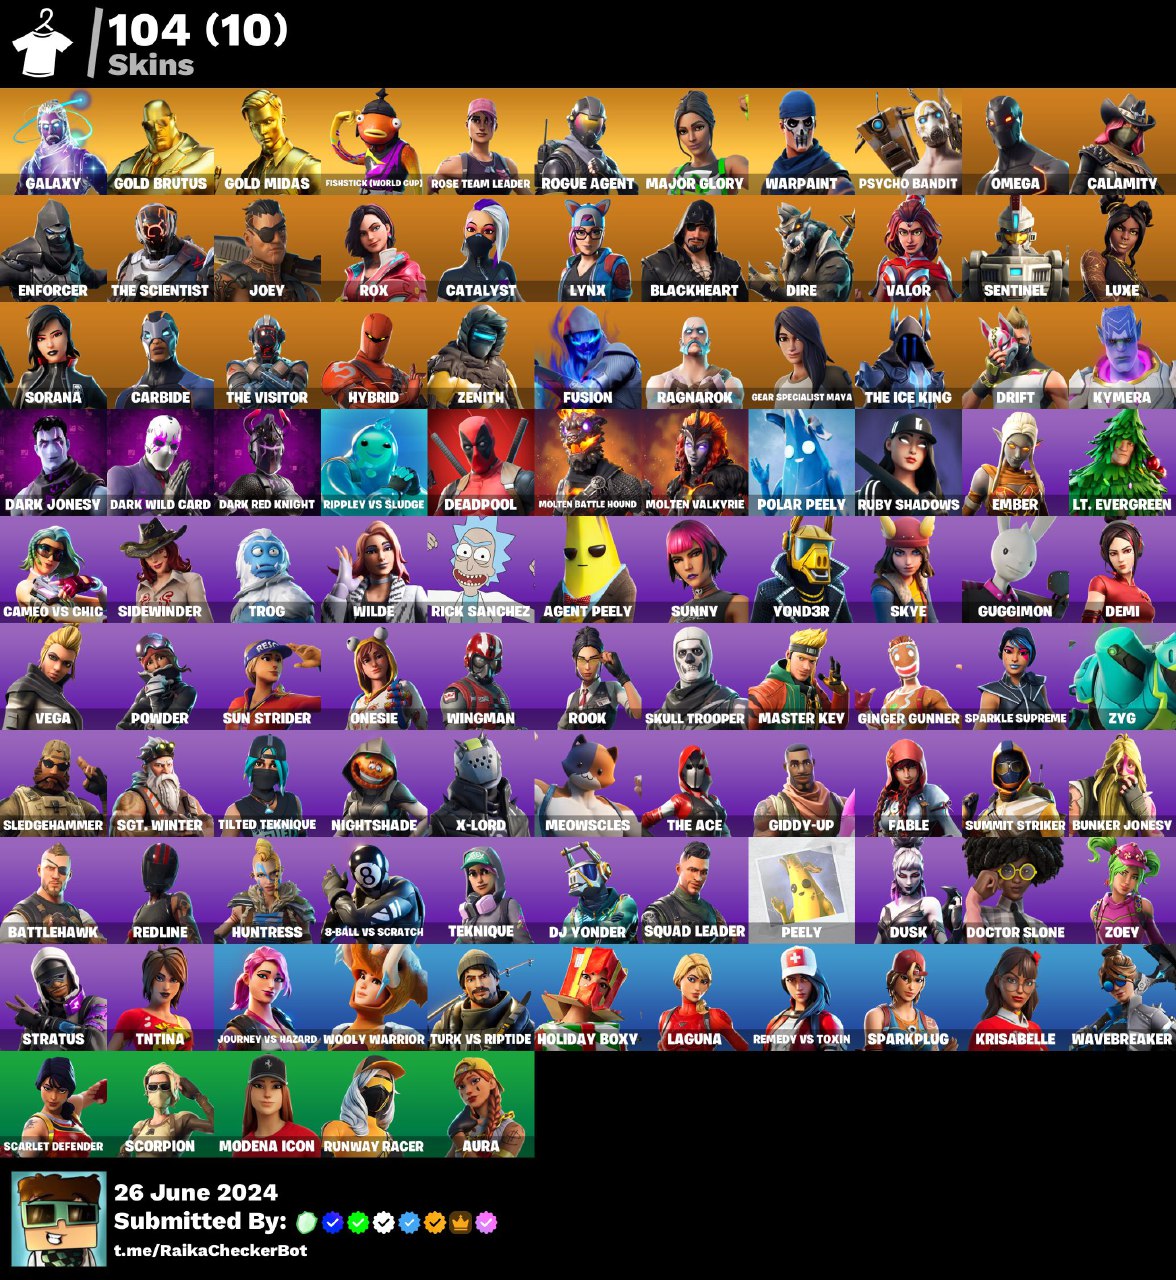 FA [PC/XBOX] 104 skins, GALAXY, MERRY MINT AXE, Gold Brutus, Gold Midas, Rogue Agent, Major Glory, Psycho Bandit